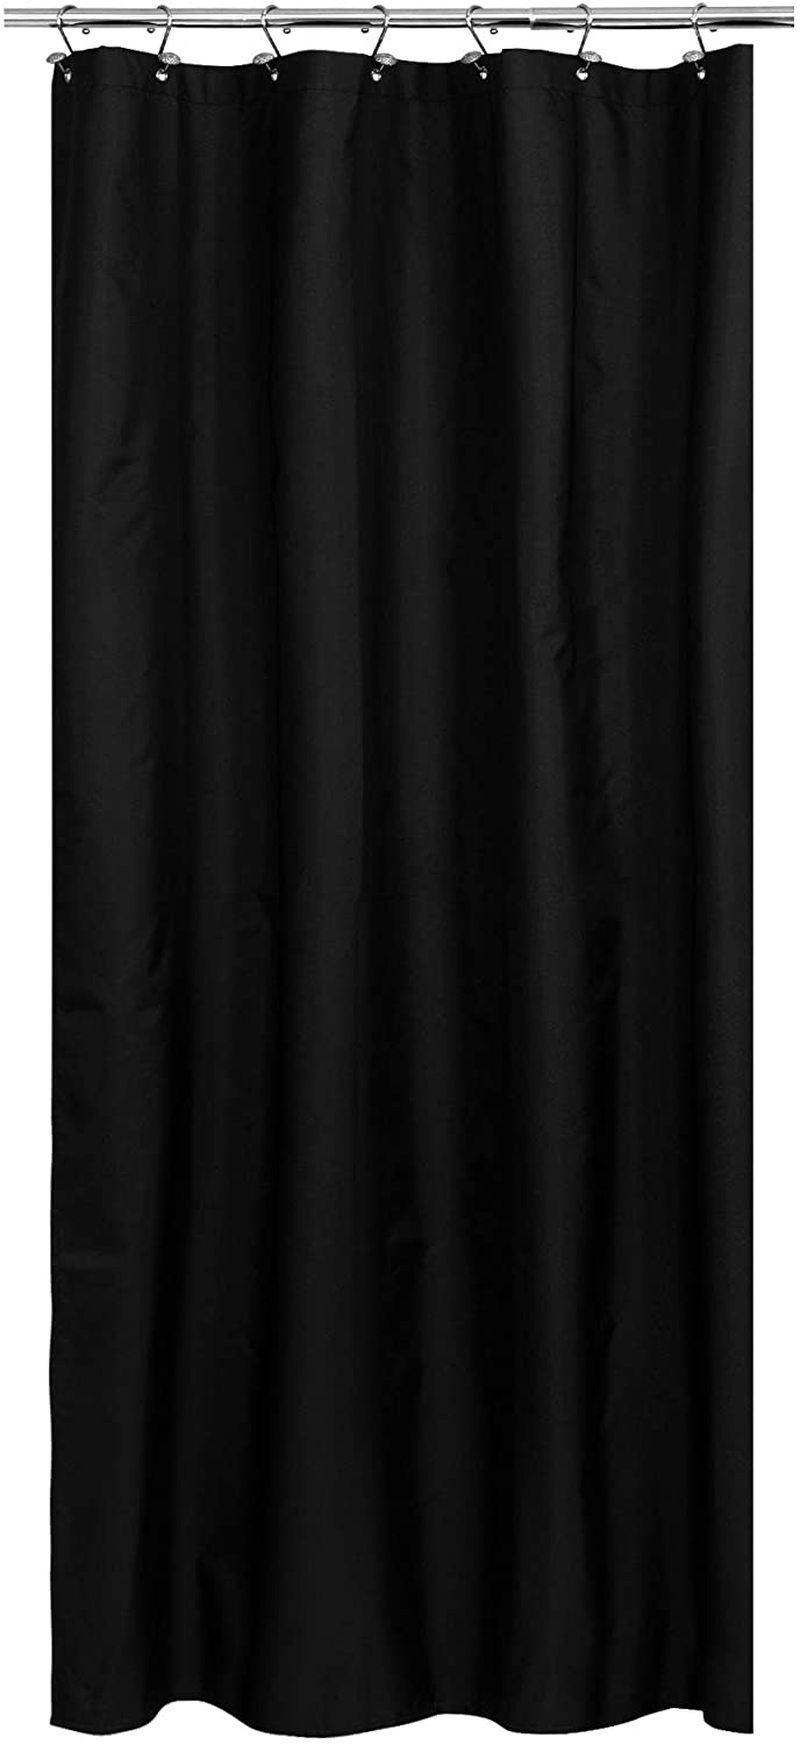  Fabric Shower Stall Curtain or Liner 36 X 72 Inches - Hotel Quality, Machine Washable, Water Repellent - Black, 36X72